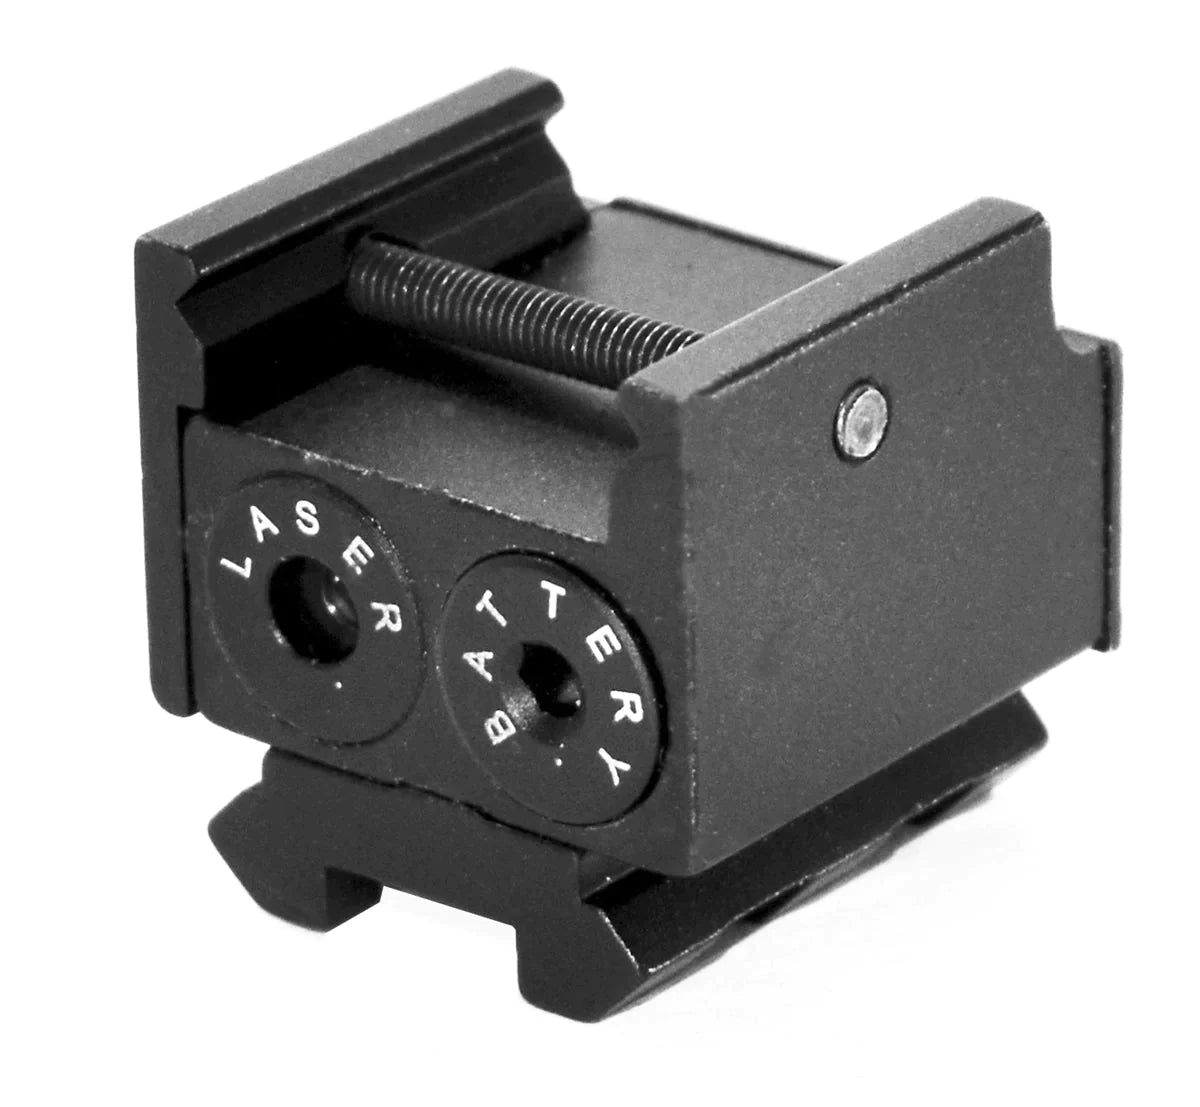 Tactical compact Red Dot Laser Sight for kel-tec pf9 models Glock Smith Wesson. - TRINITY SUPPLY INC